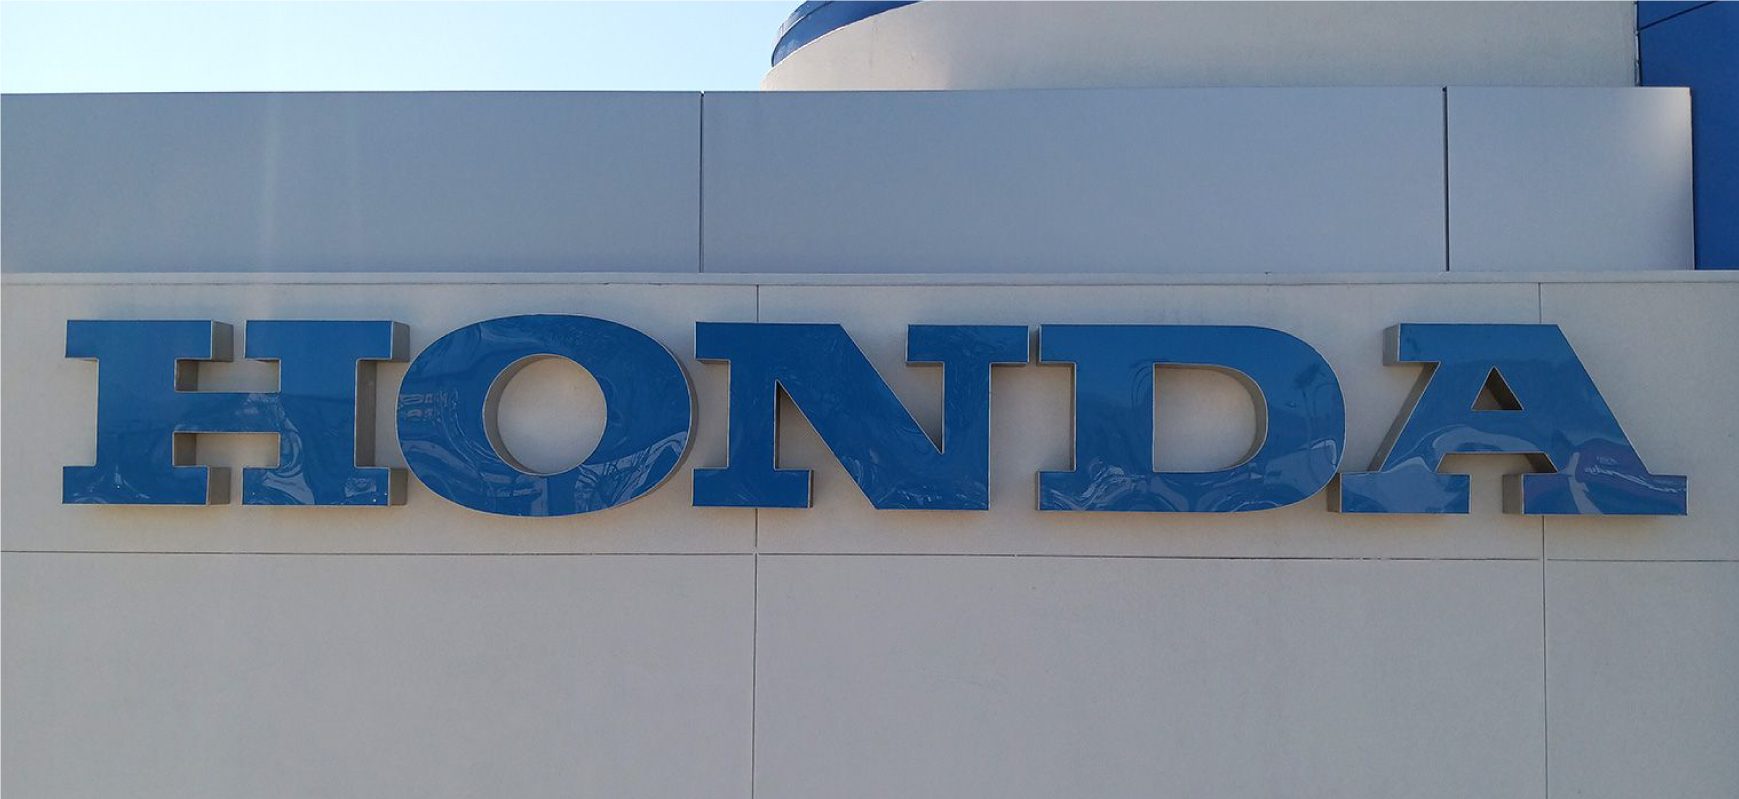 Honda commercial sign repair of the blue storefront brand name made of acrylic and aluminum